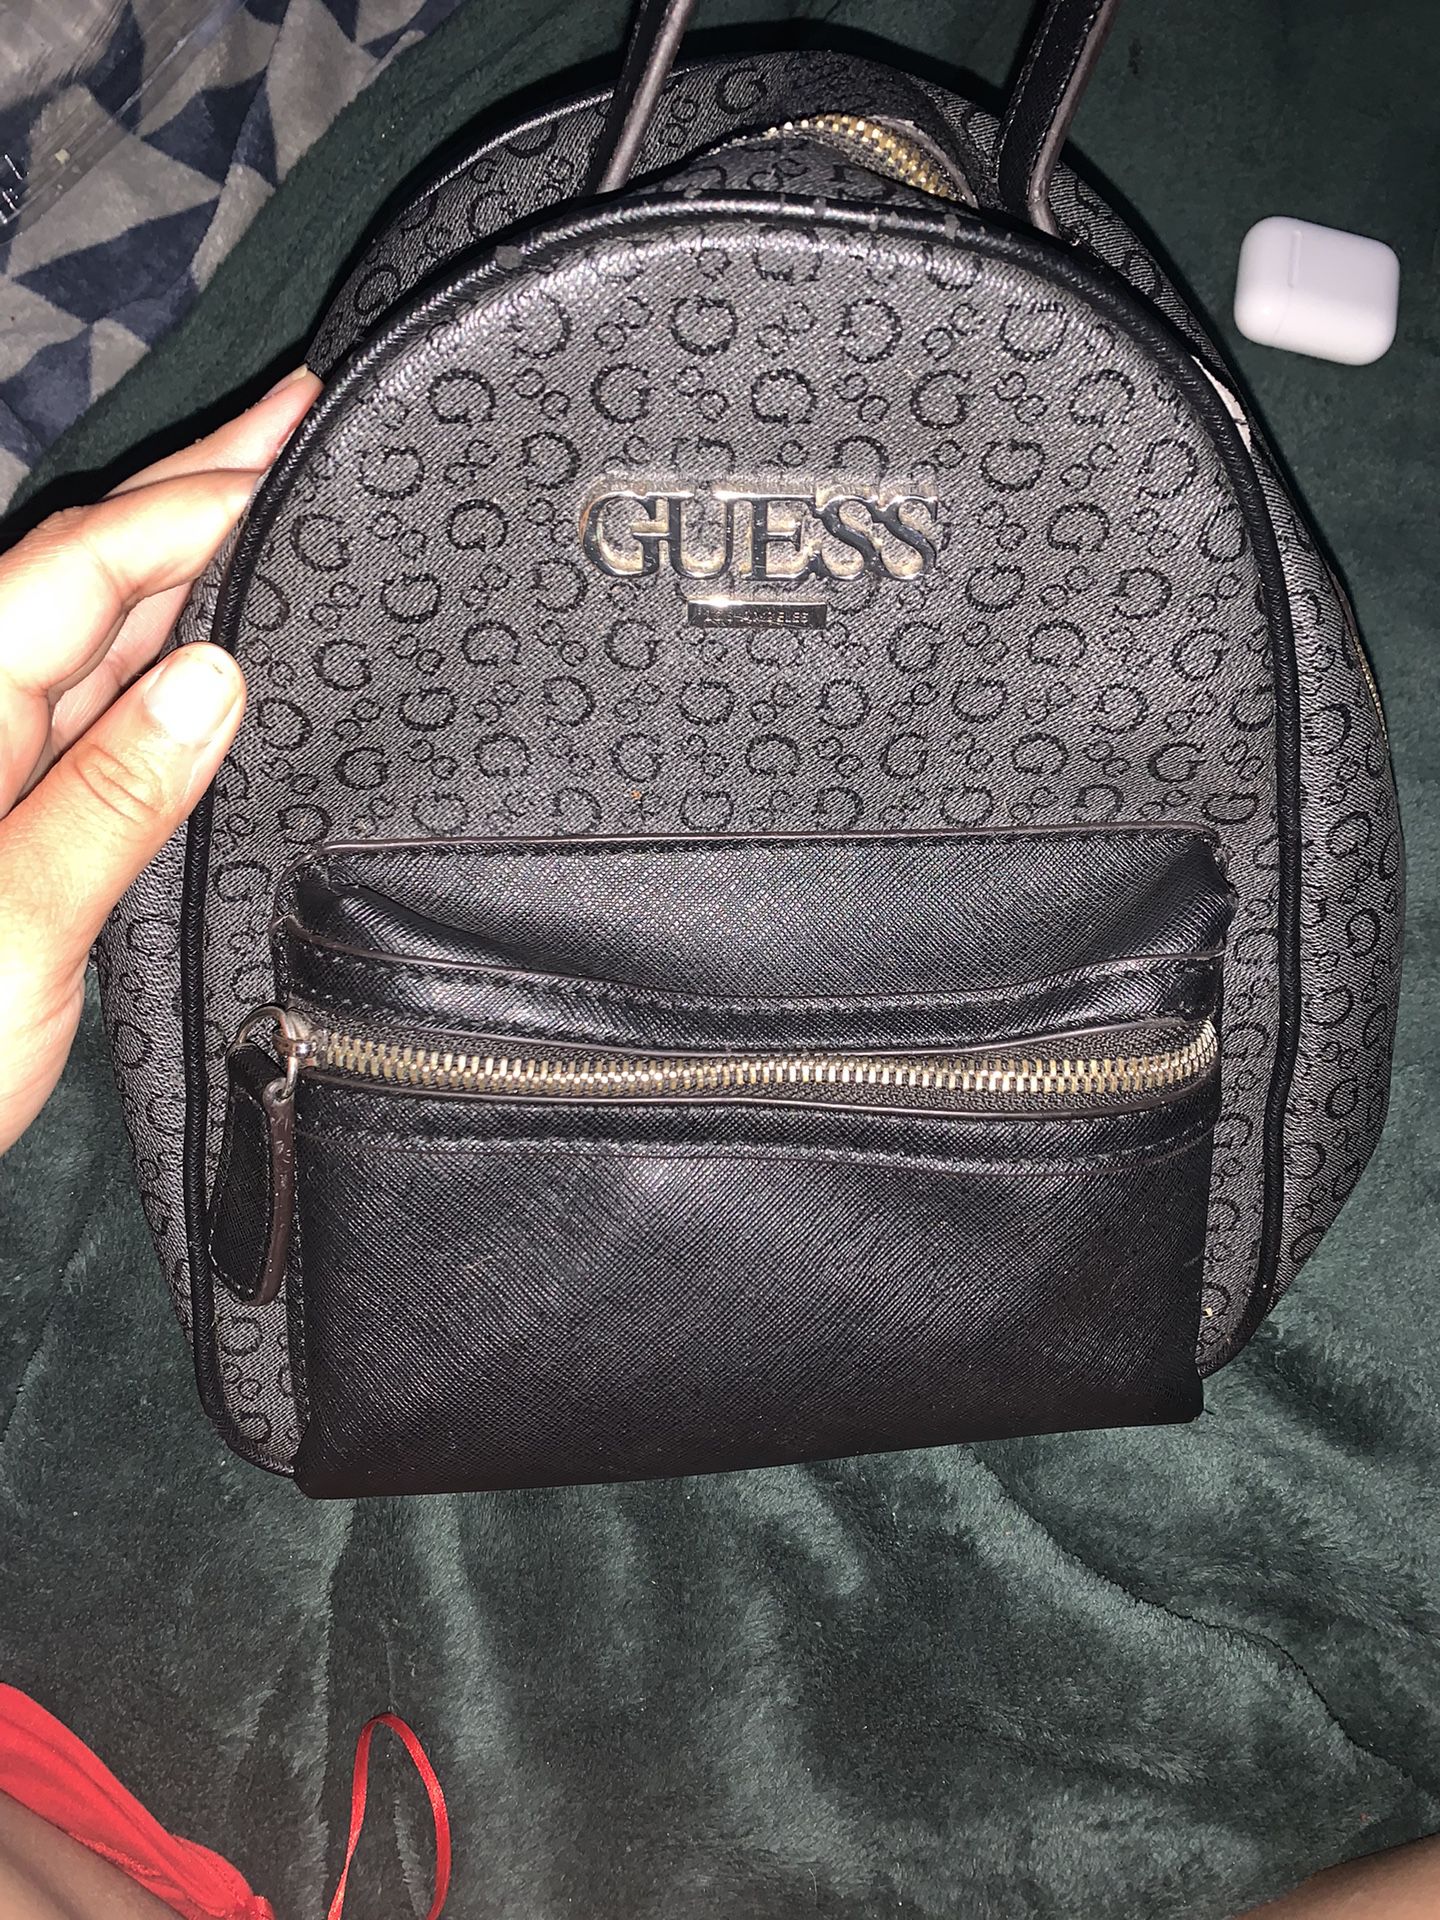 Guess And Coach Bag And Wallet 45$ Each